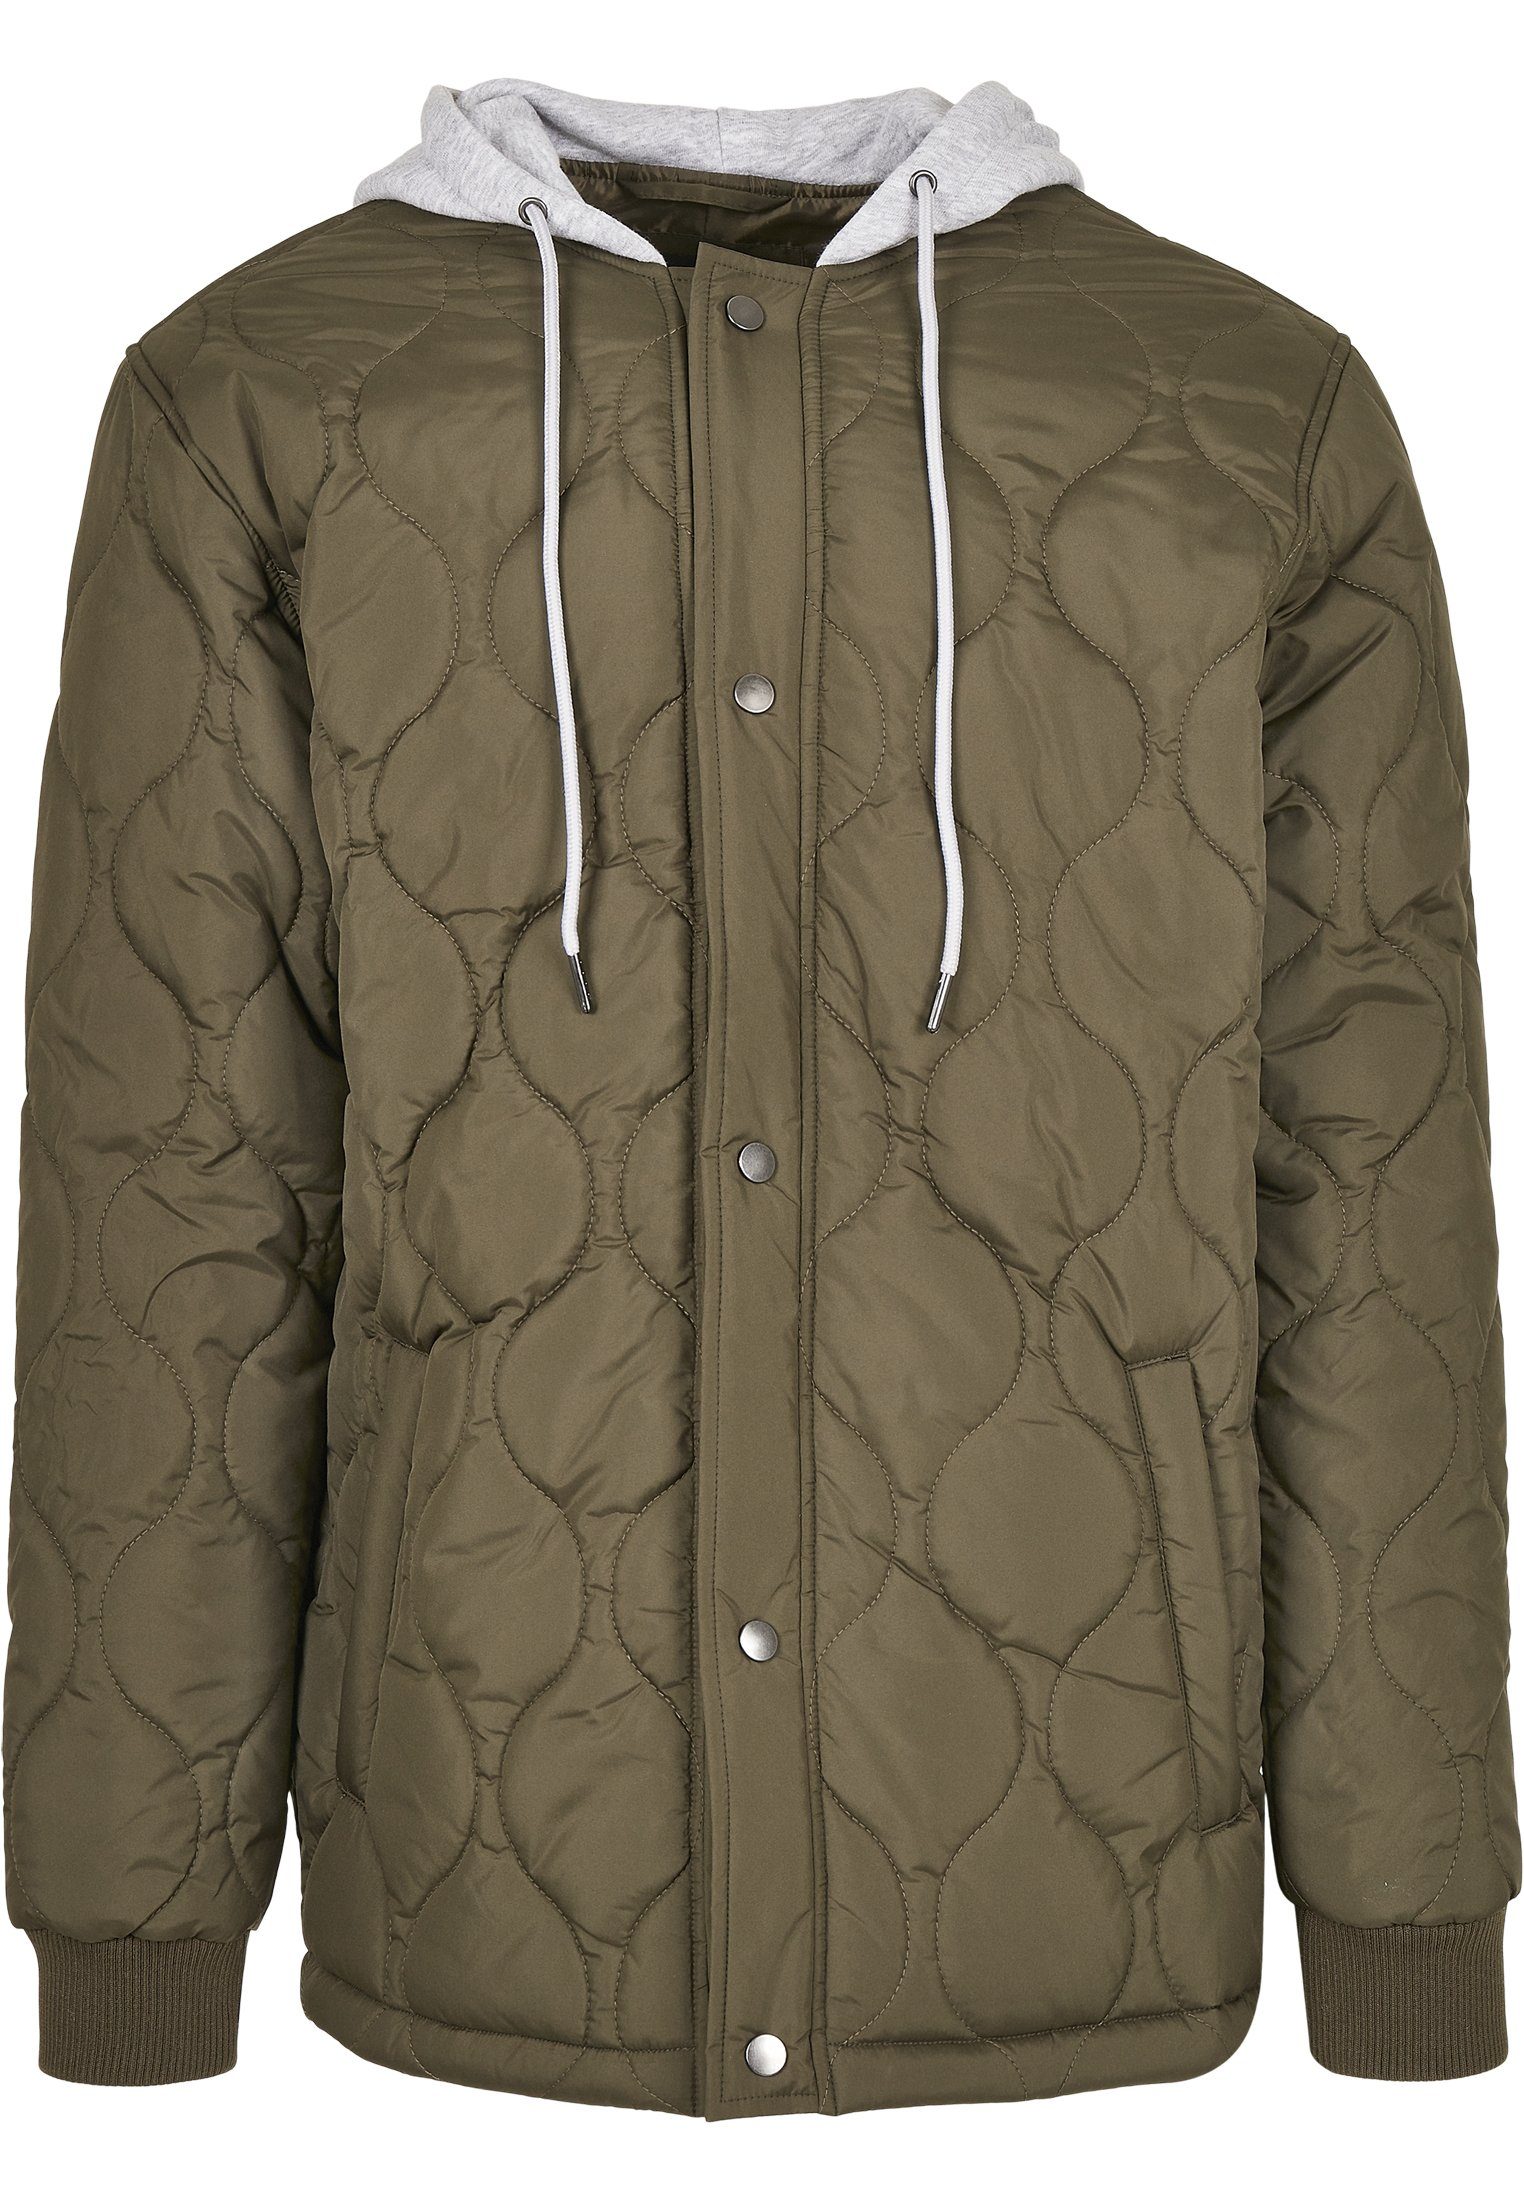 CLASSICS Jacket Hooded Outdoorjacke Männer Quilted URBAN (1-St)